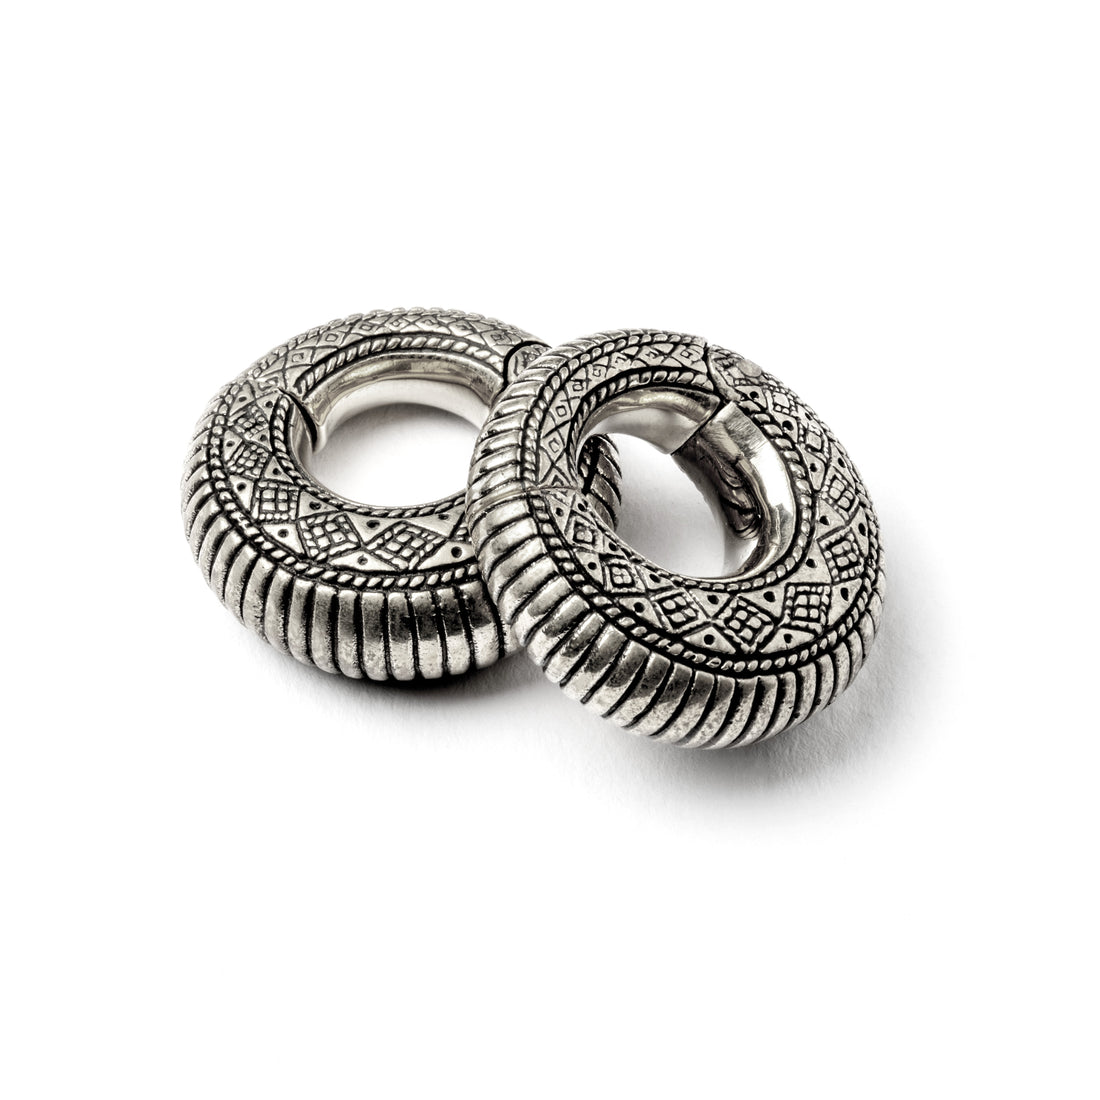 pair of silver brass ear weights hoops with geometric tribal engraved pattern 